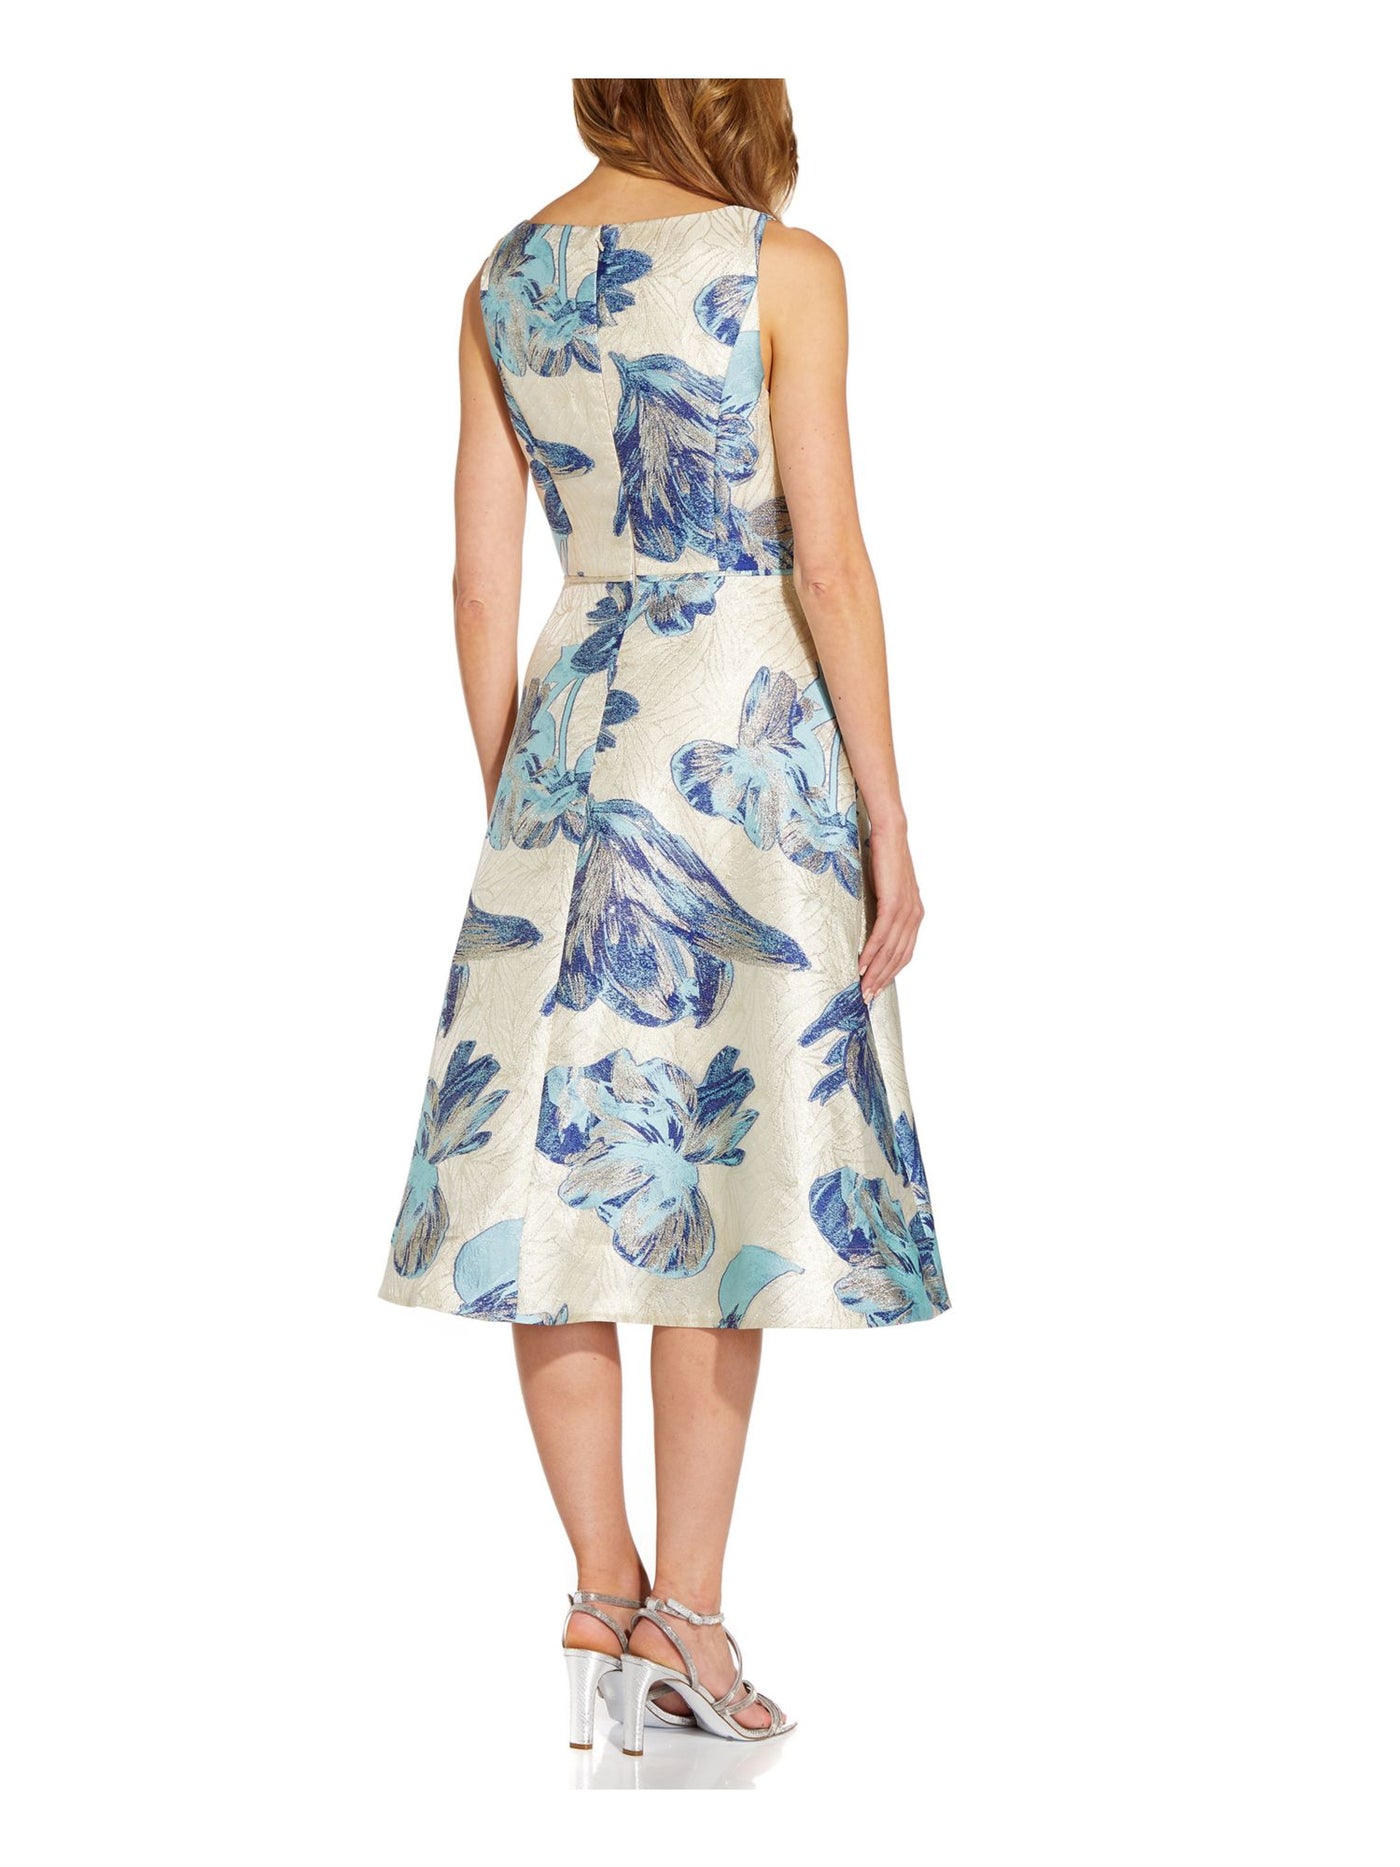 ADRIANNA PAPELL Womens Blue Metallic Zippered Lined Floral Sleeveless Square Neck Below The Knee Cocktail Fit + Flare Dress 4